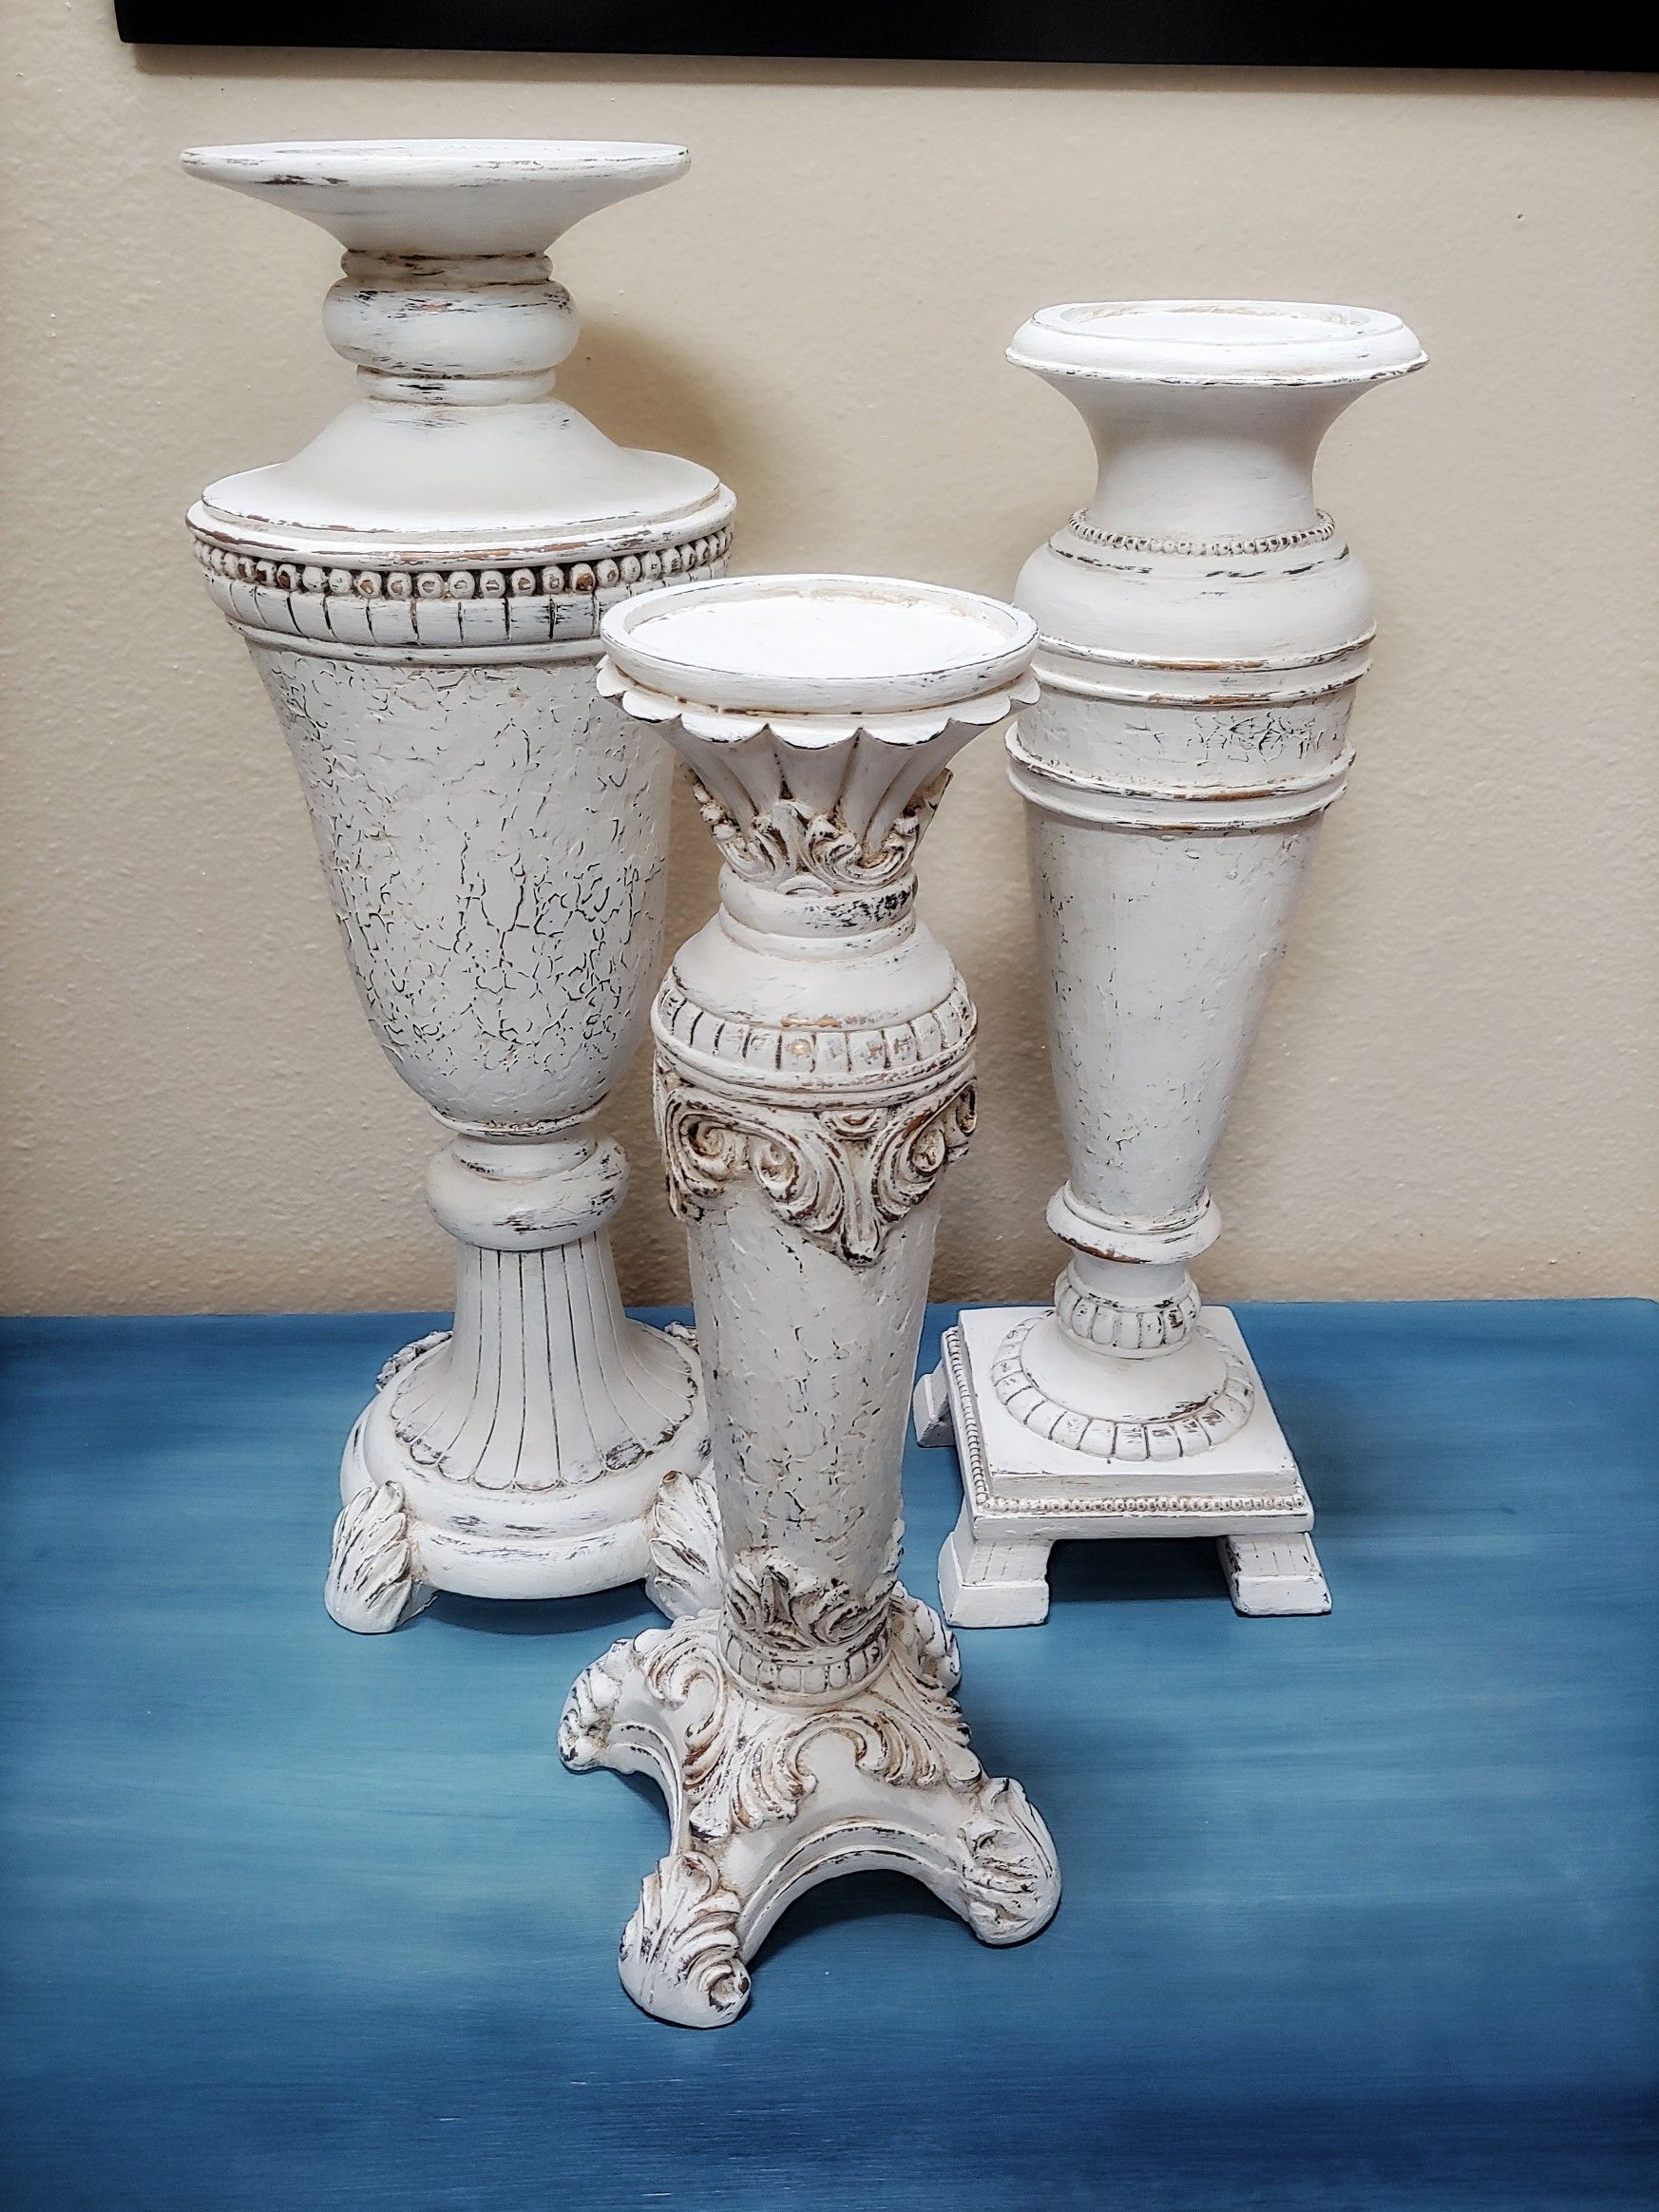 Painted candle holders